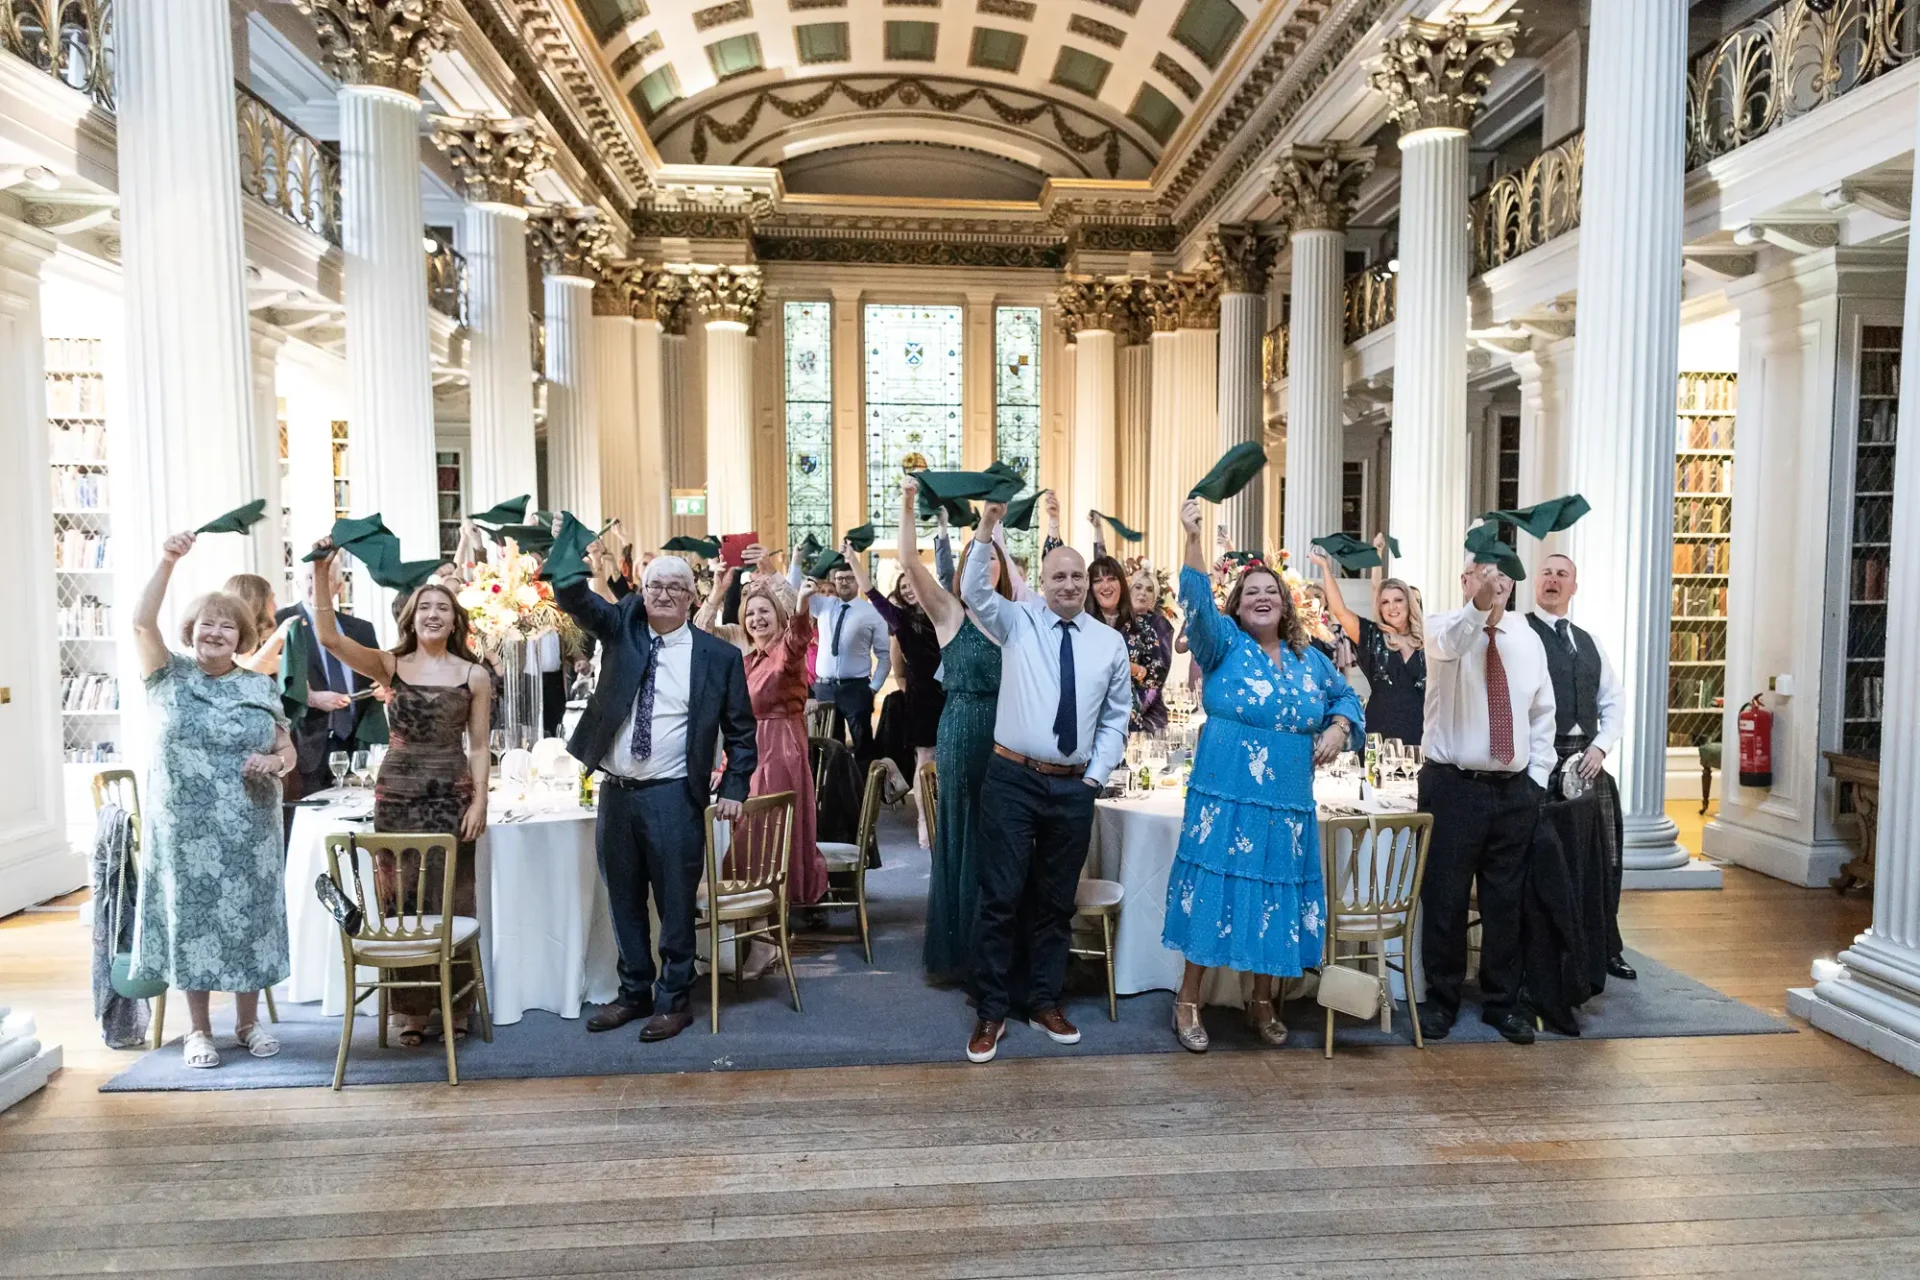 People joyfully tossing their graduation caps in the air at a formal dinner event in an elegant hall with classical architecture.